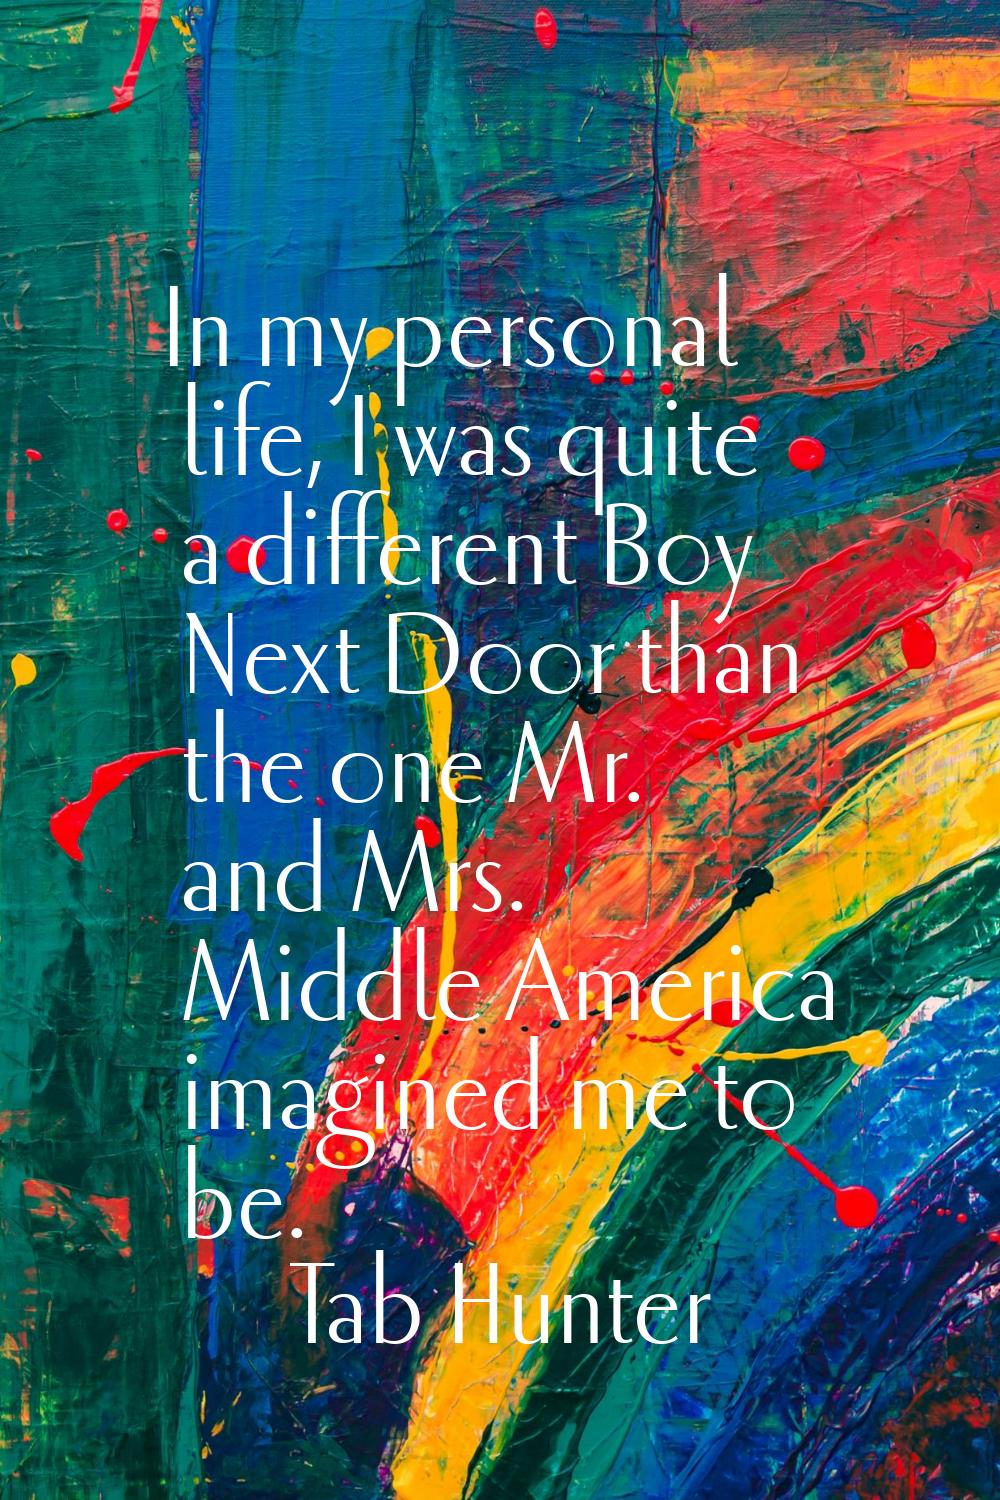 In my personal life, I was quite a different Boy Next Door than the one Mr. and Mrs. Middle America